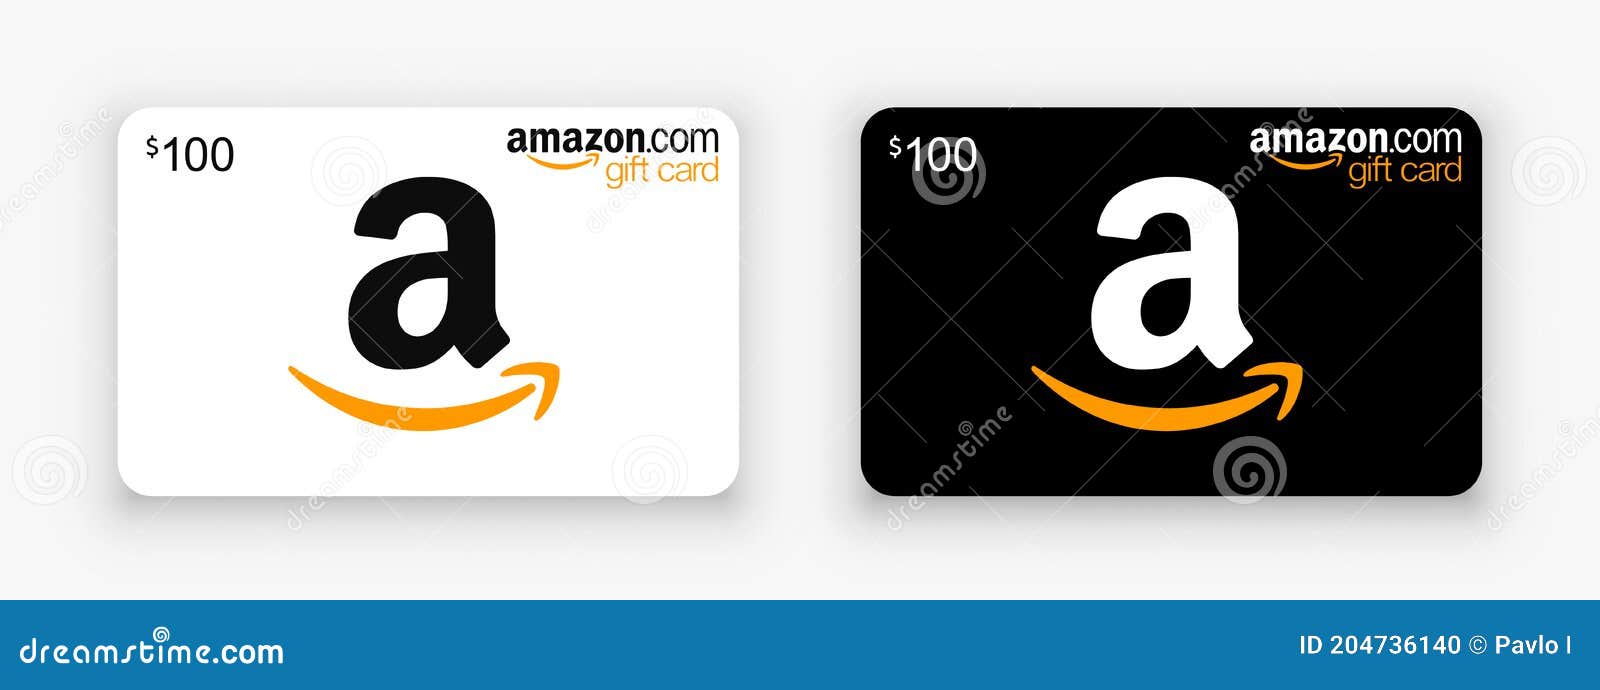 Where Can I Buy Amazon Gift Card in Ukraine? 2